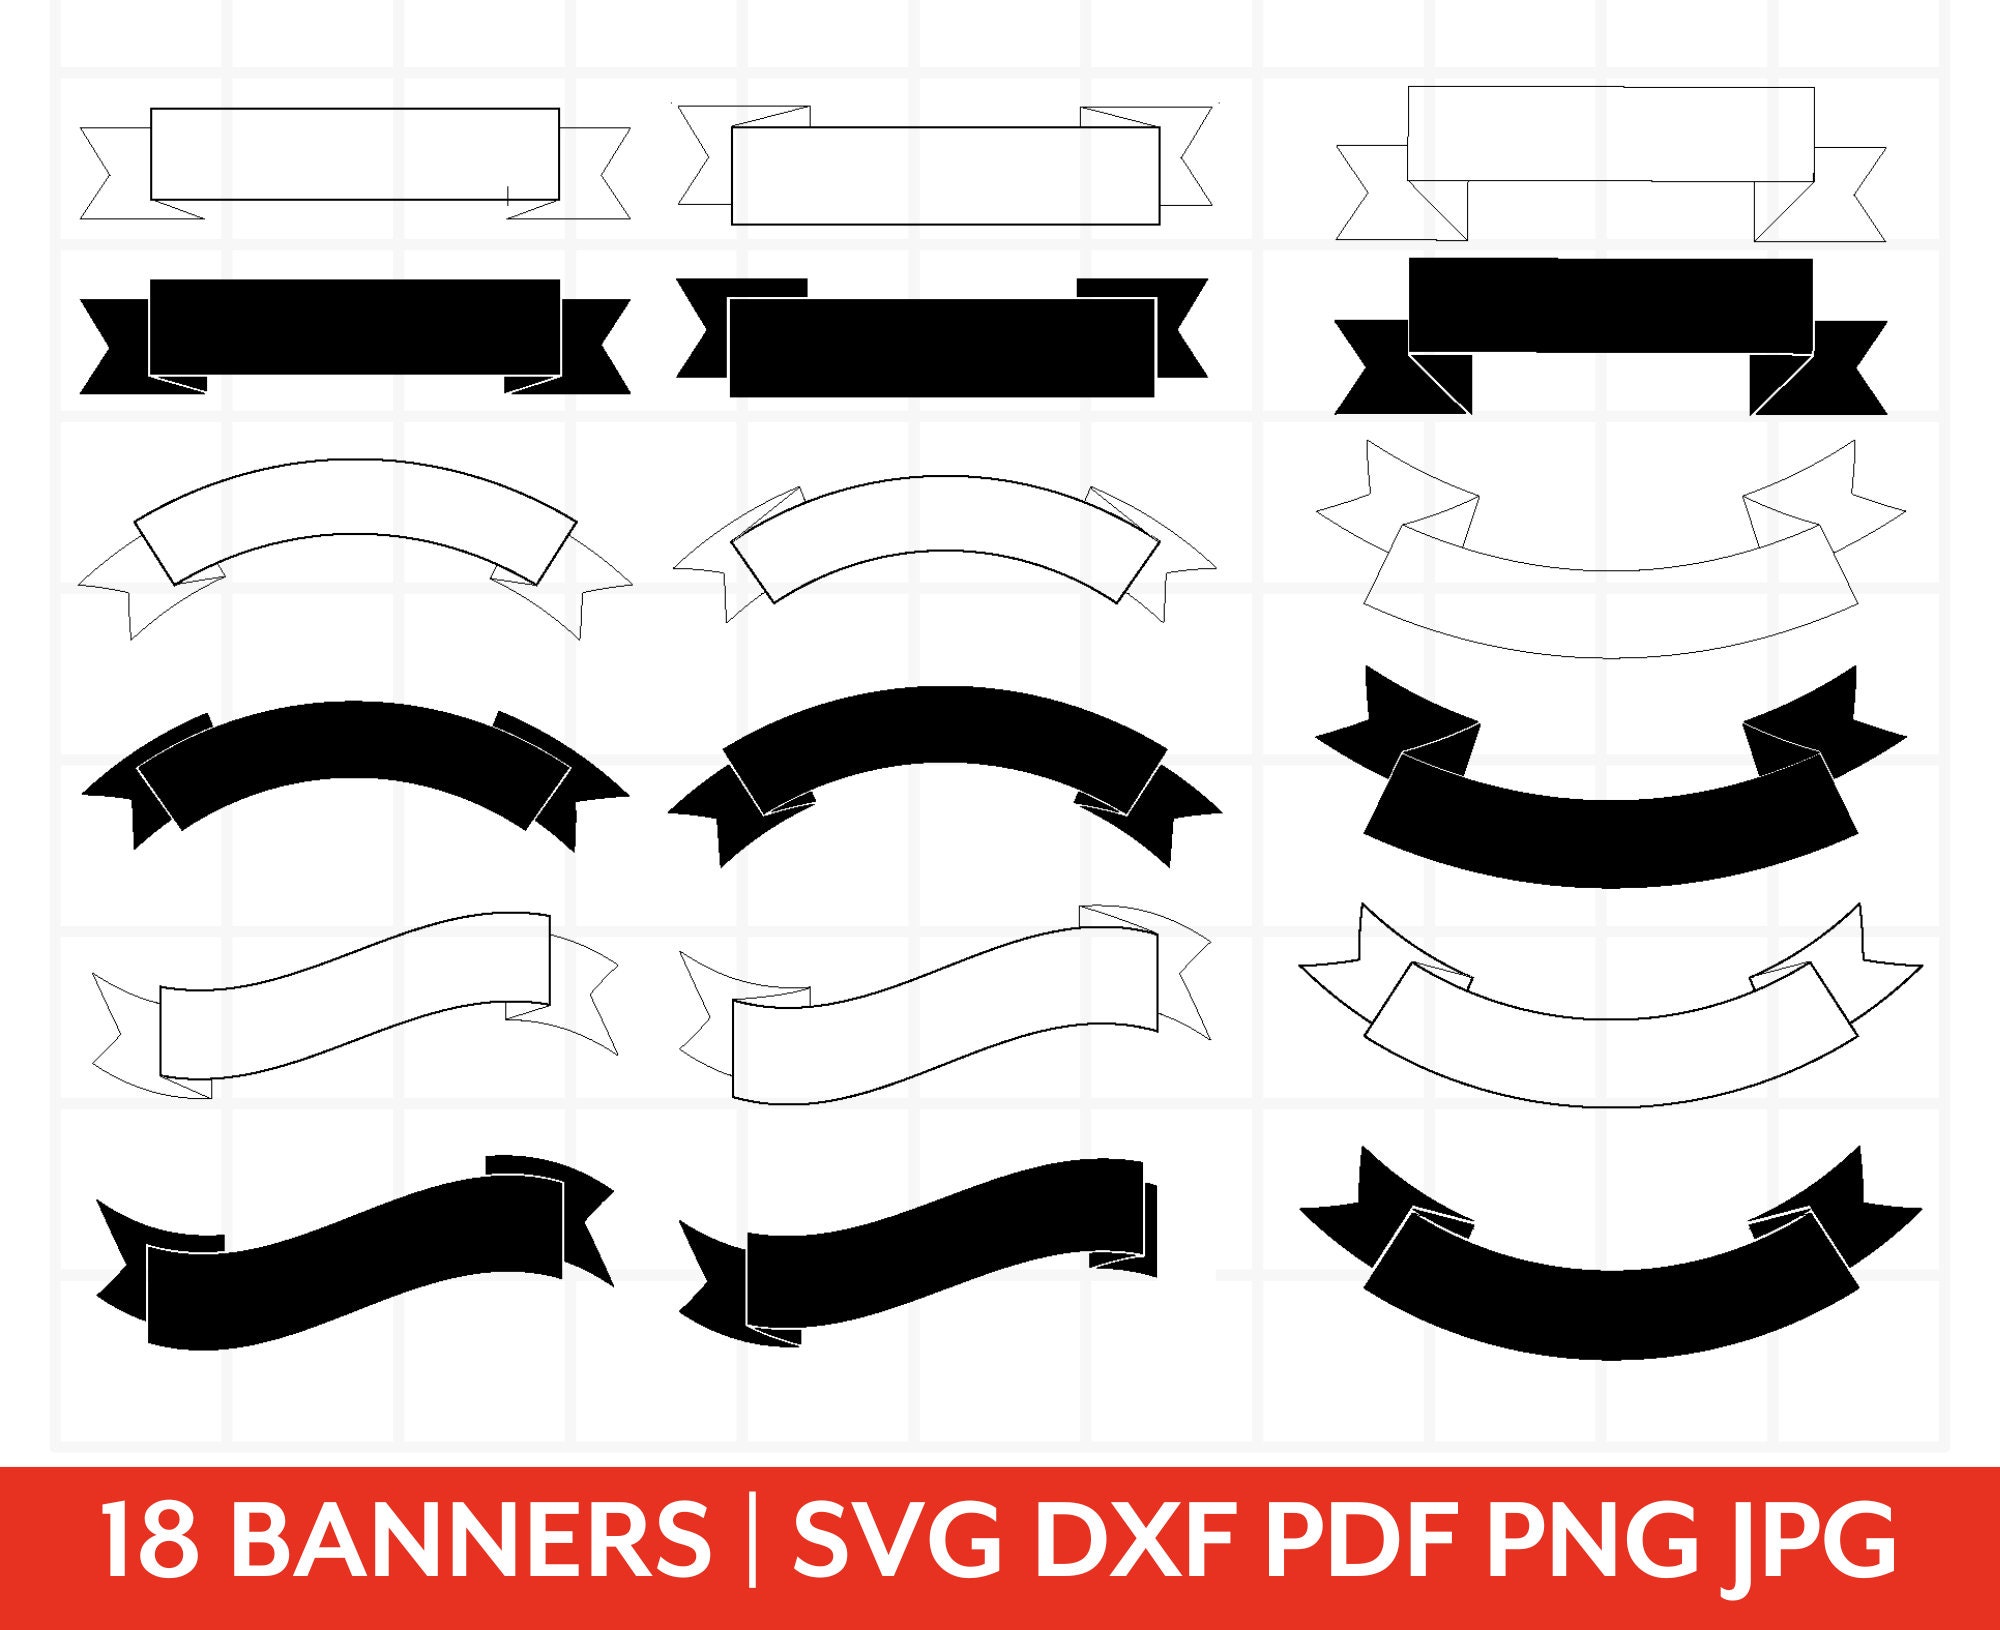 Diy do it yourself banner with silhouettes Vector Image